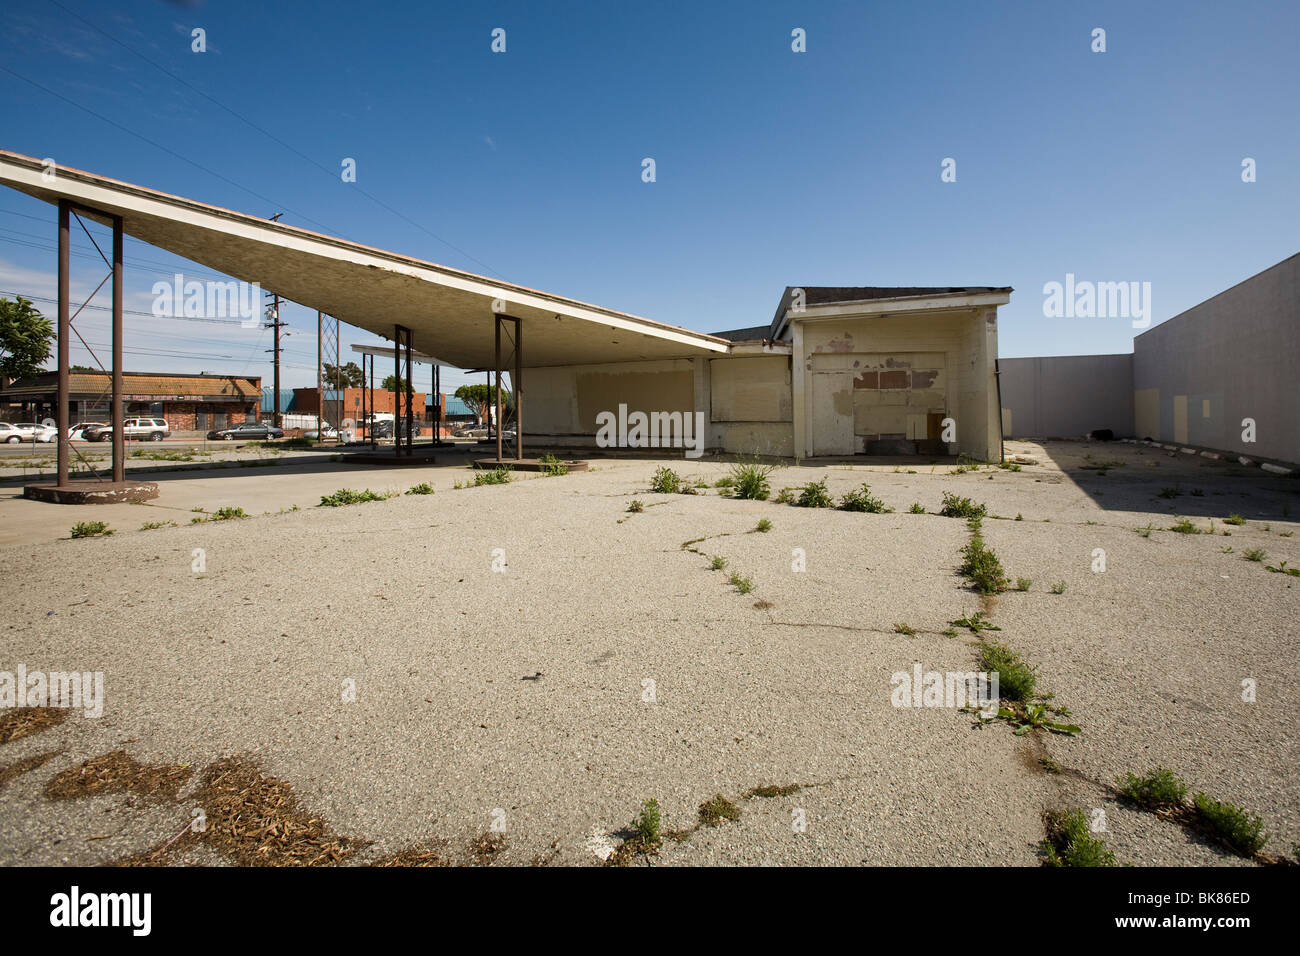 Abandoned Gas Station, South Los Angeles, California, United States of America Stock Photo